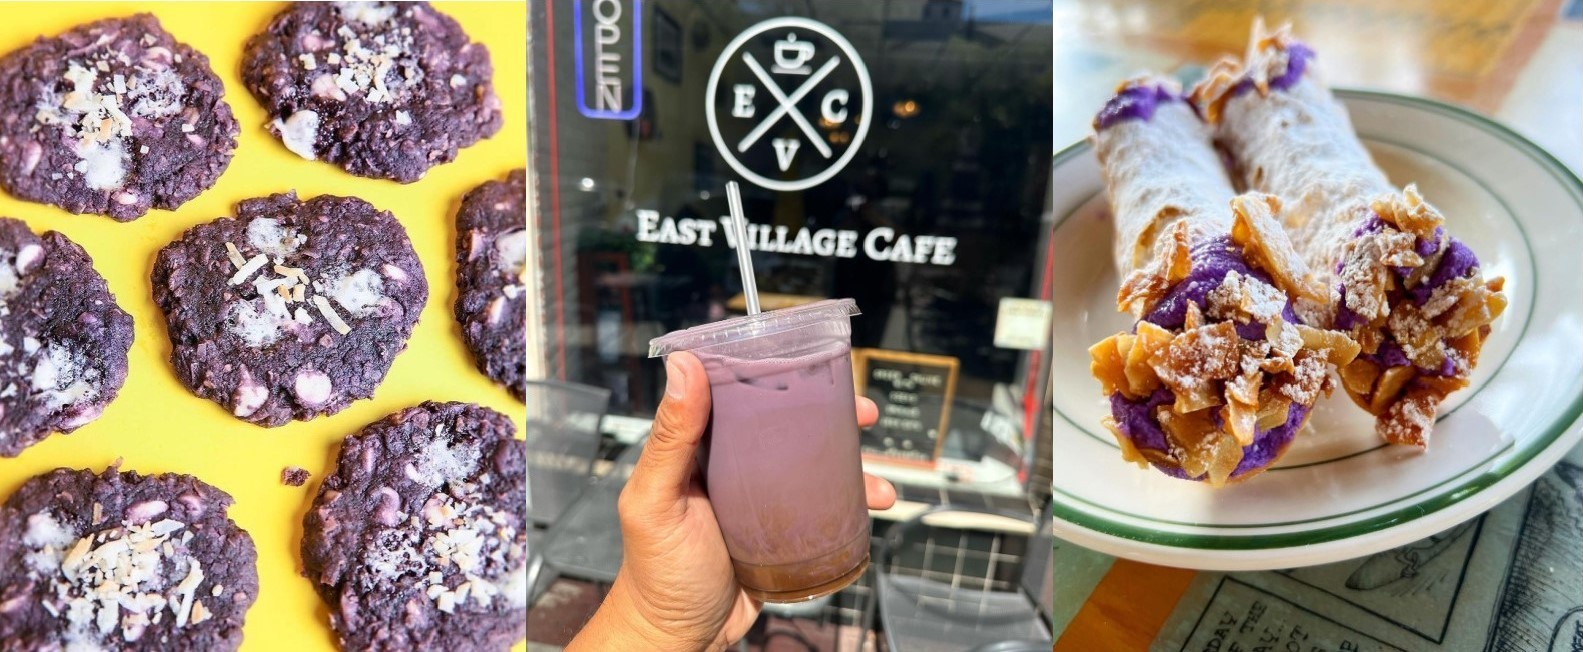 Long Beach Ube Fest returns to East Village for a flavorful second year